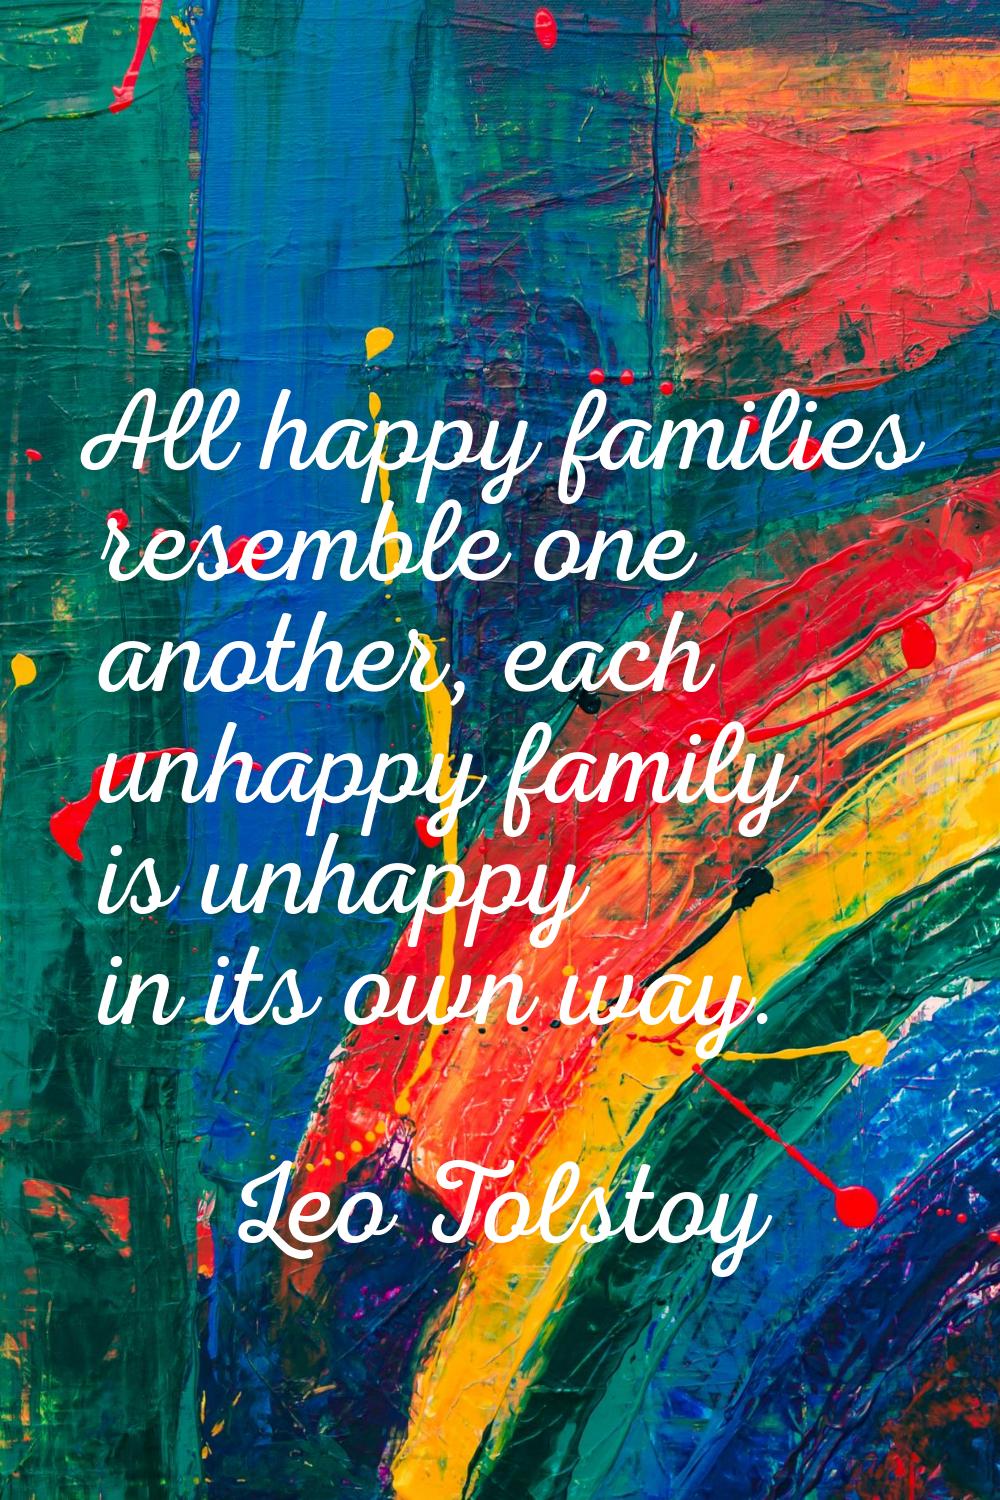 All happy families resemble one another, each unhappy family is unhappy in its own way.